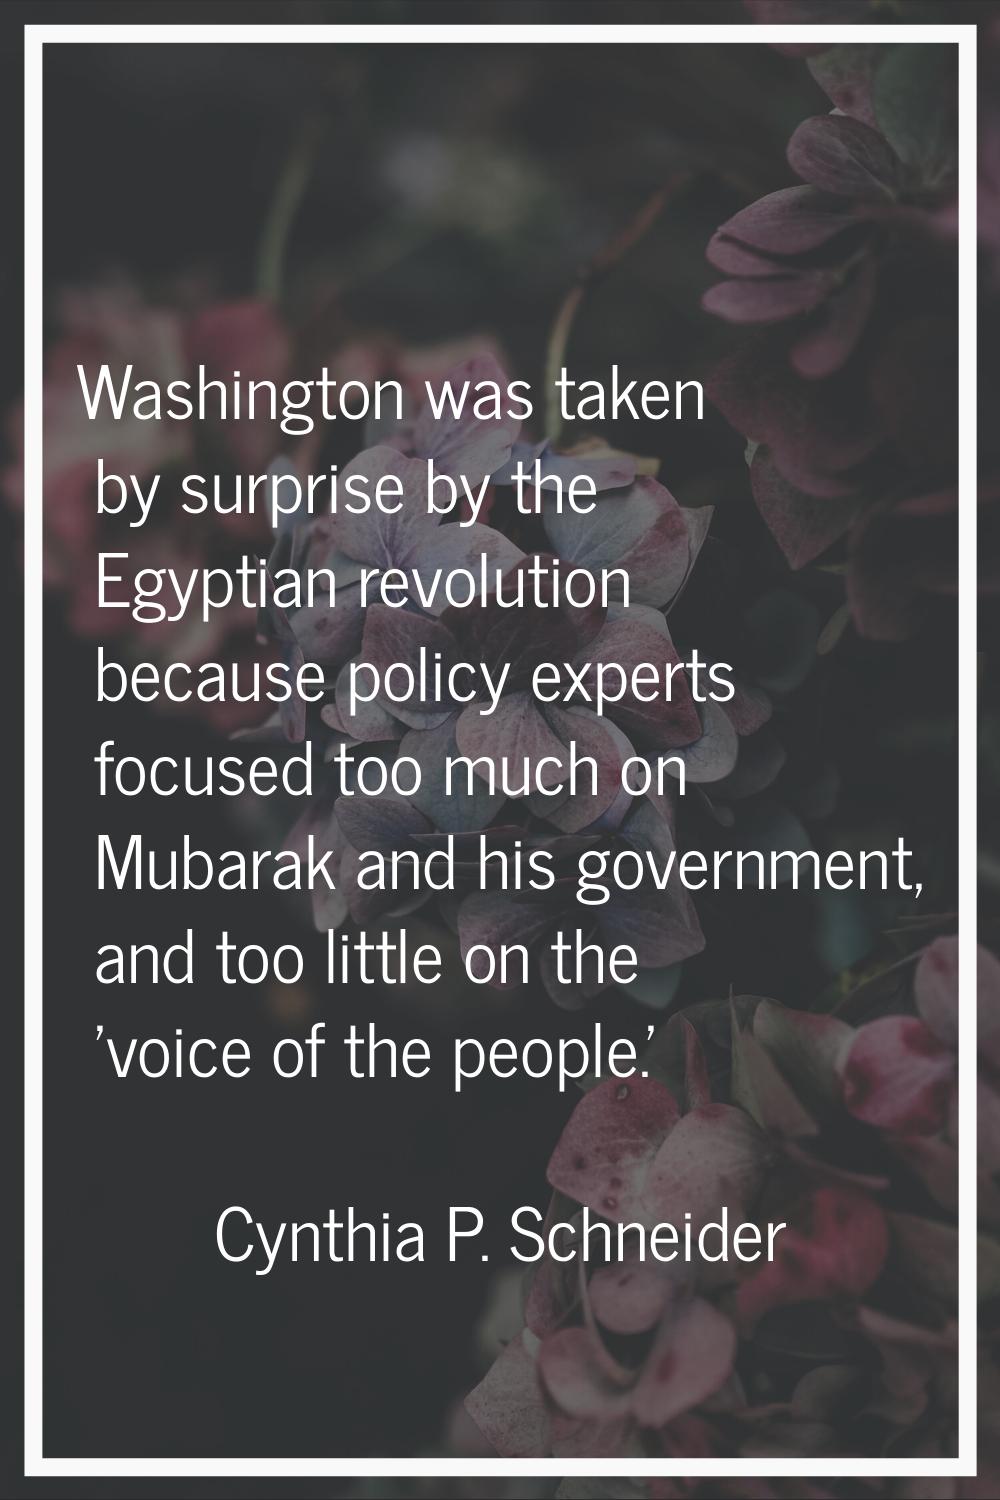 Washington was taken by surprise by the Egyptian revolution because policy experts focused too much